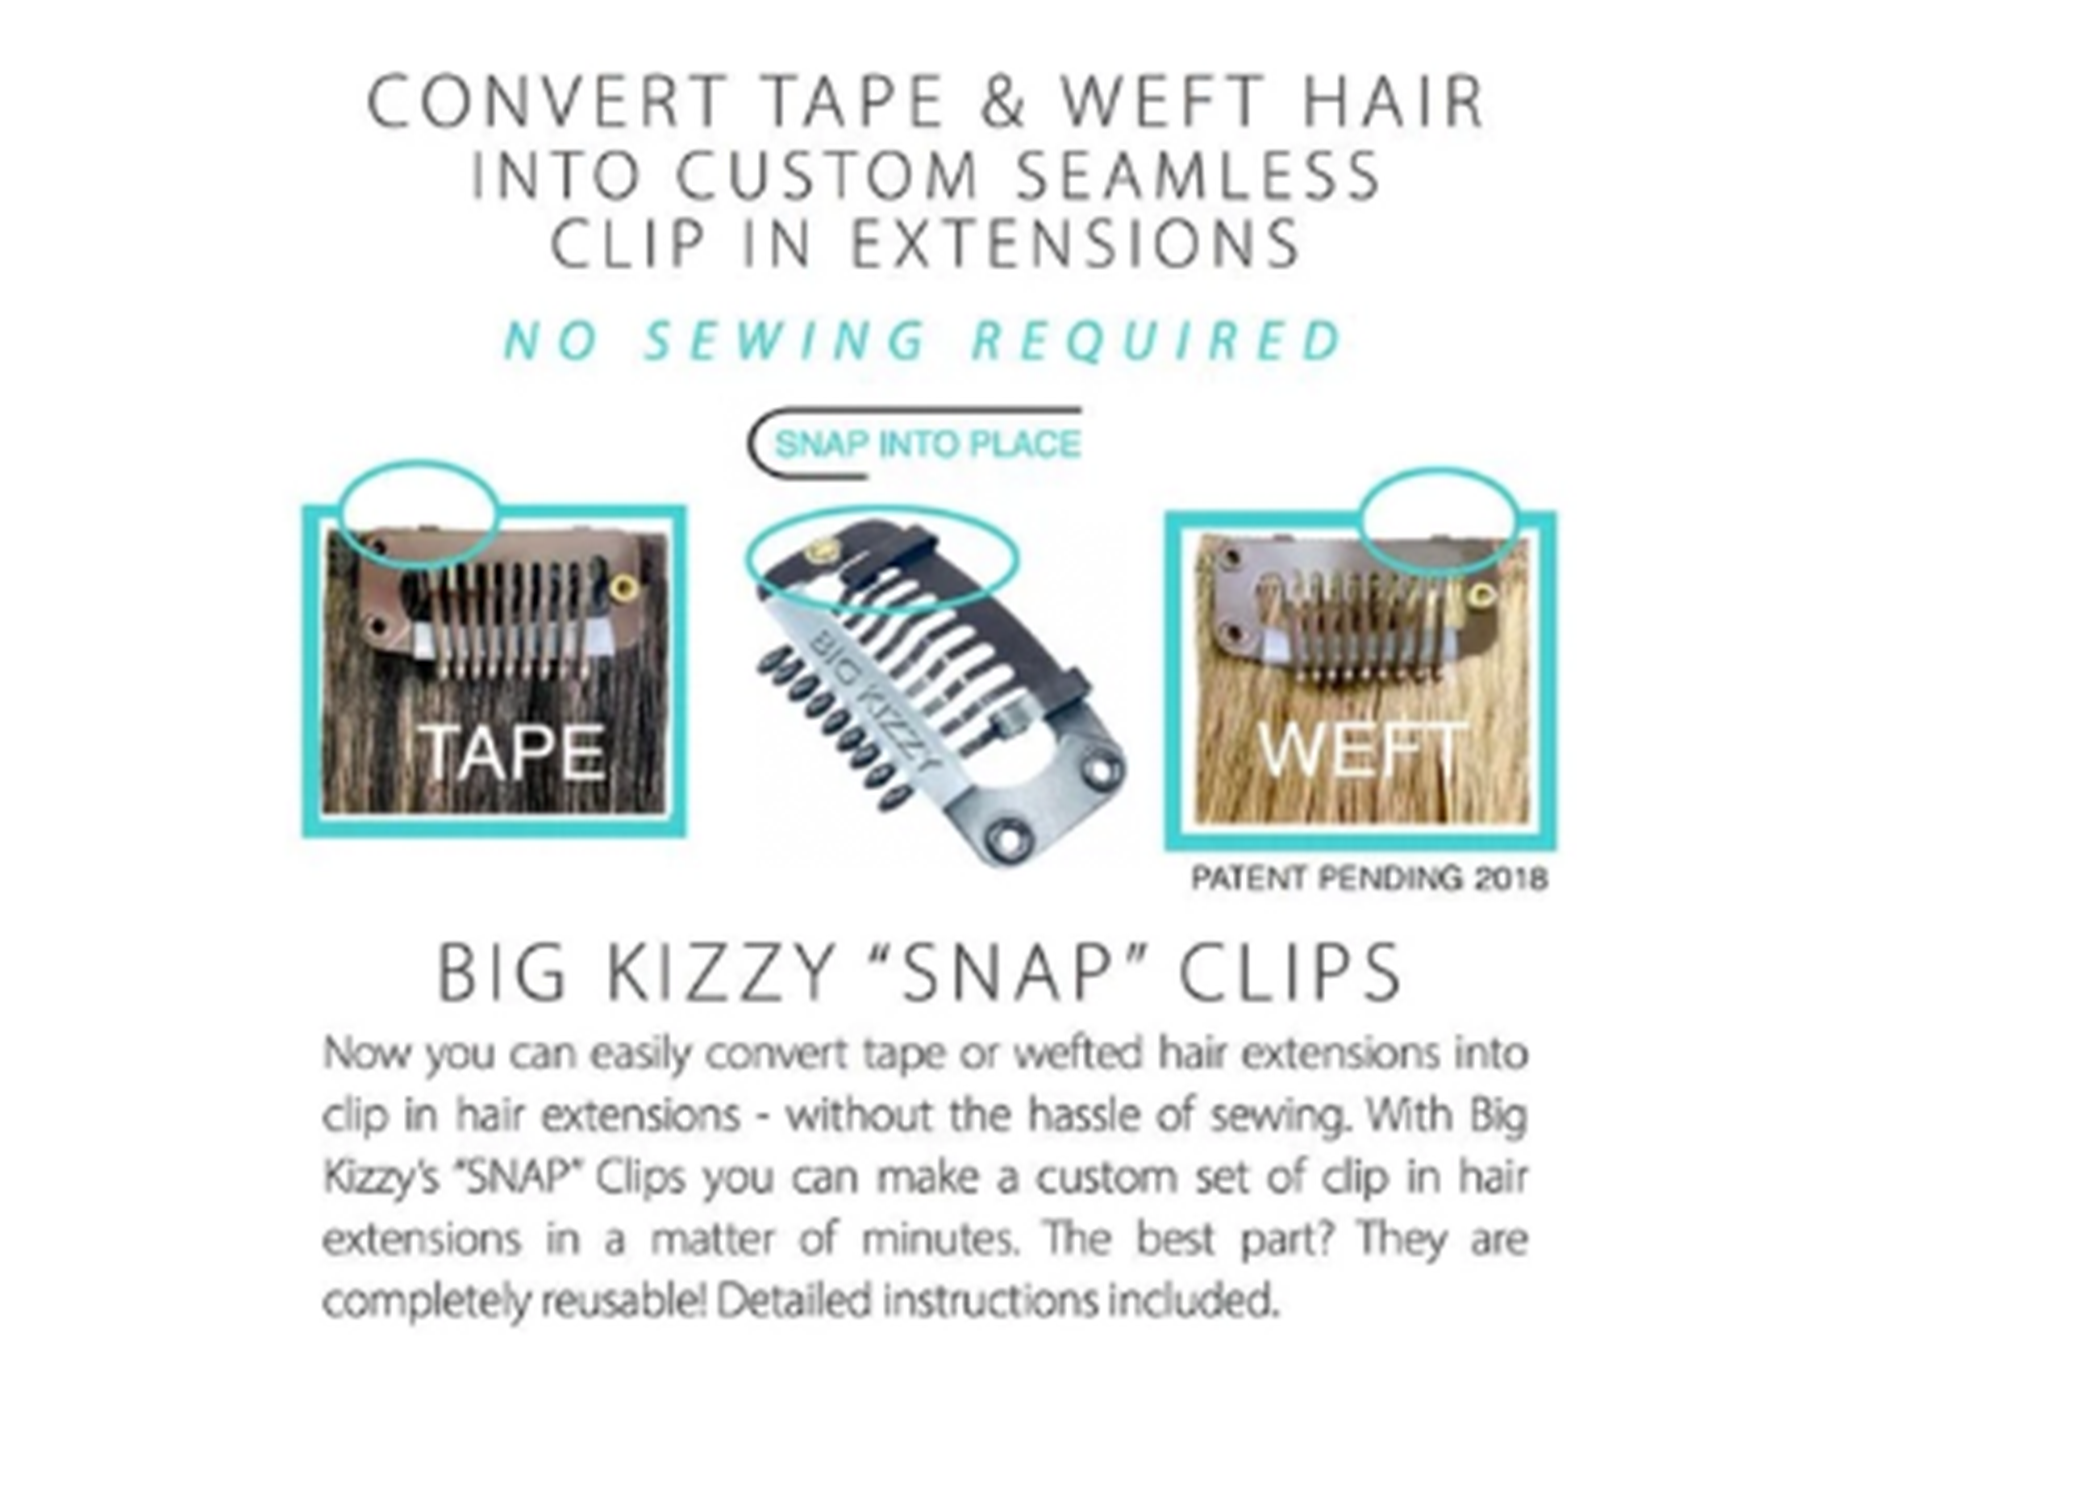 STOP THROWING AWAY YOUR OLD TAPE EXTENSIONS!